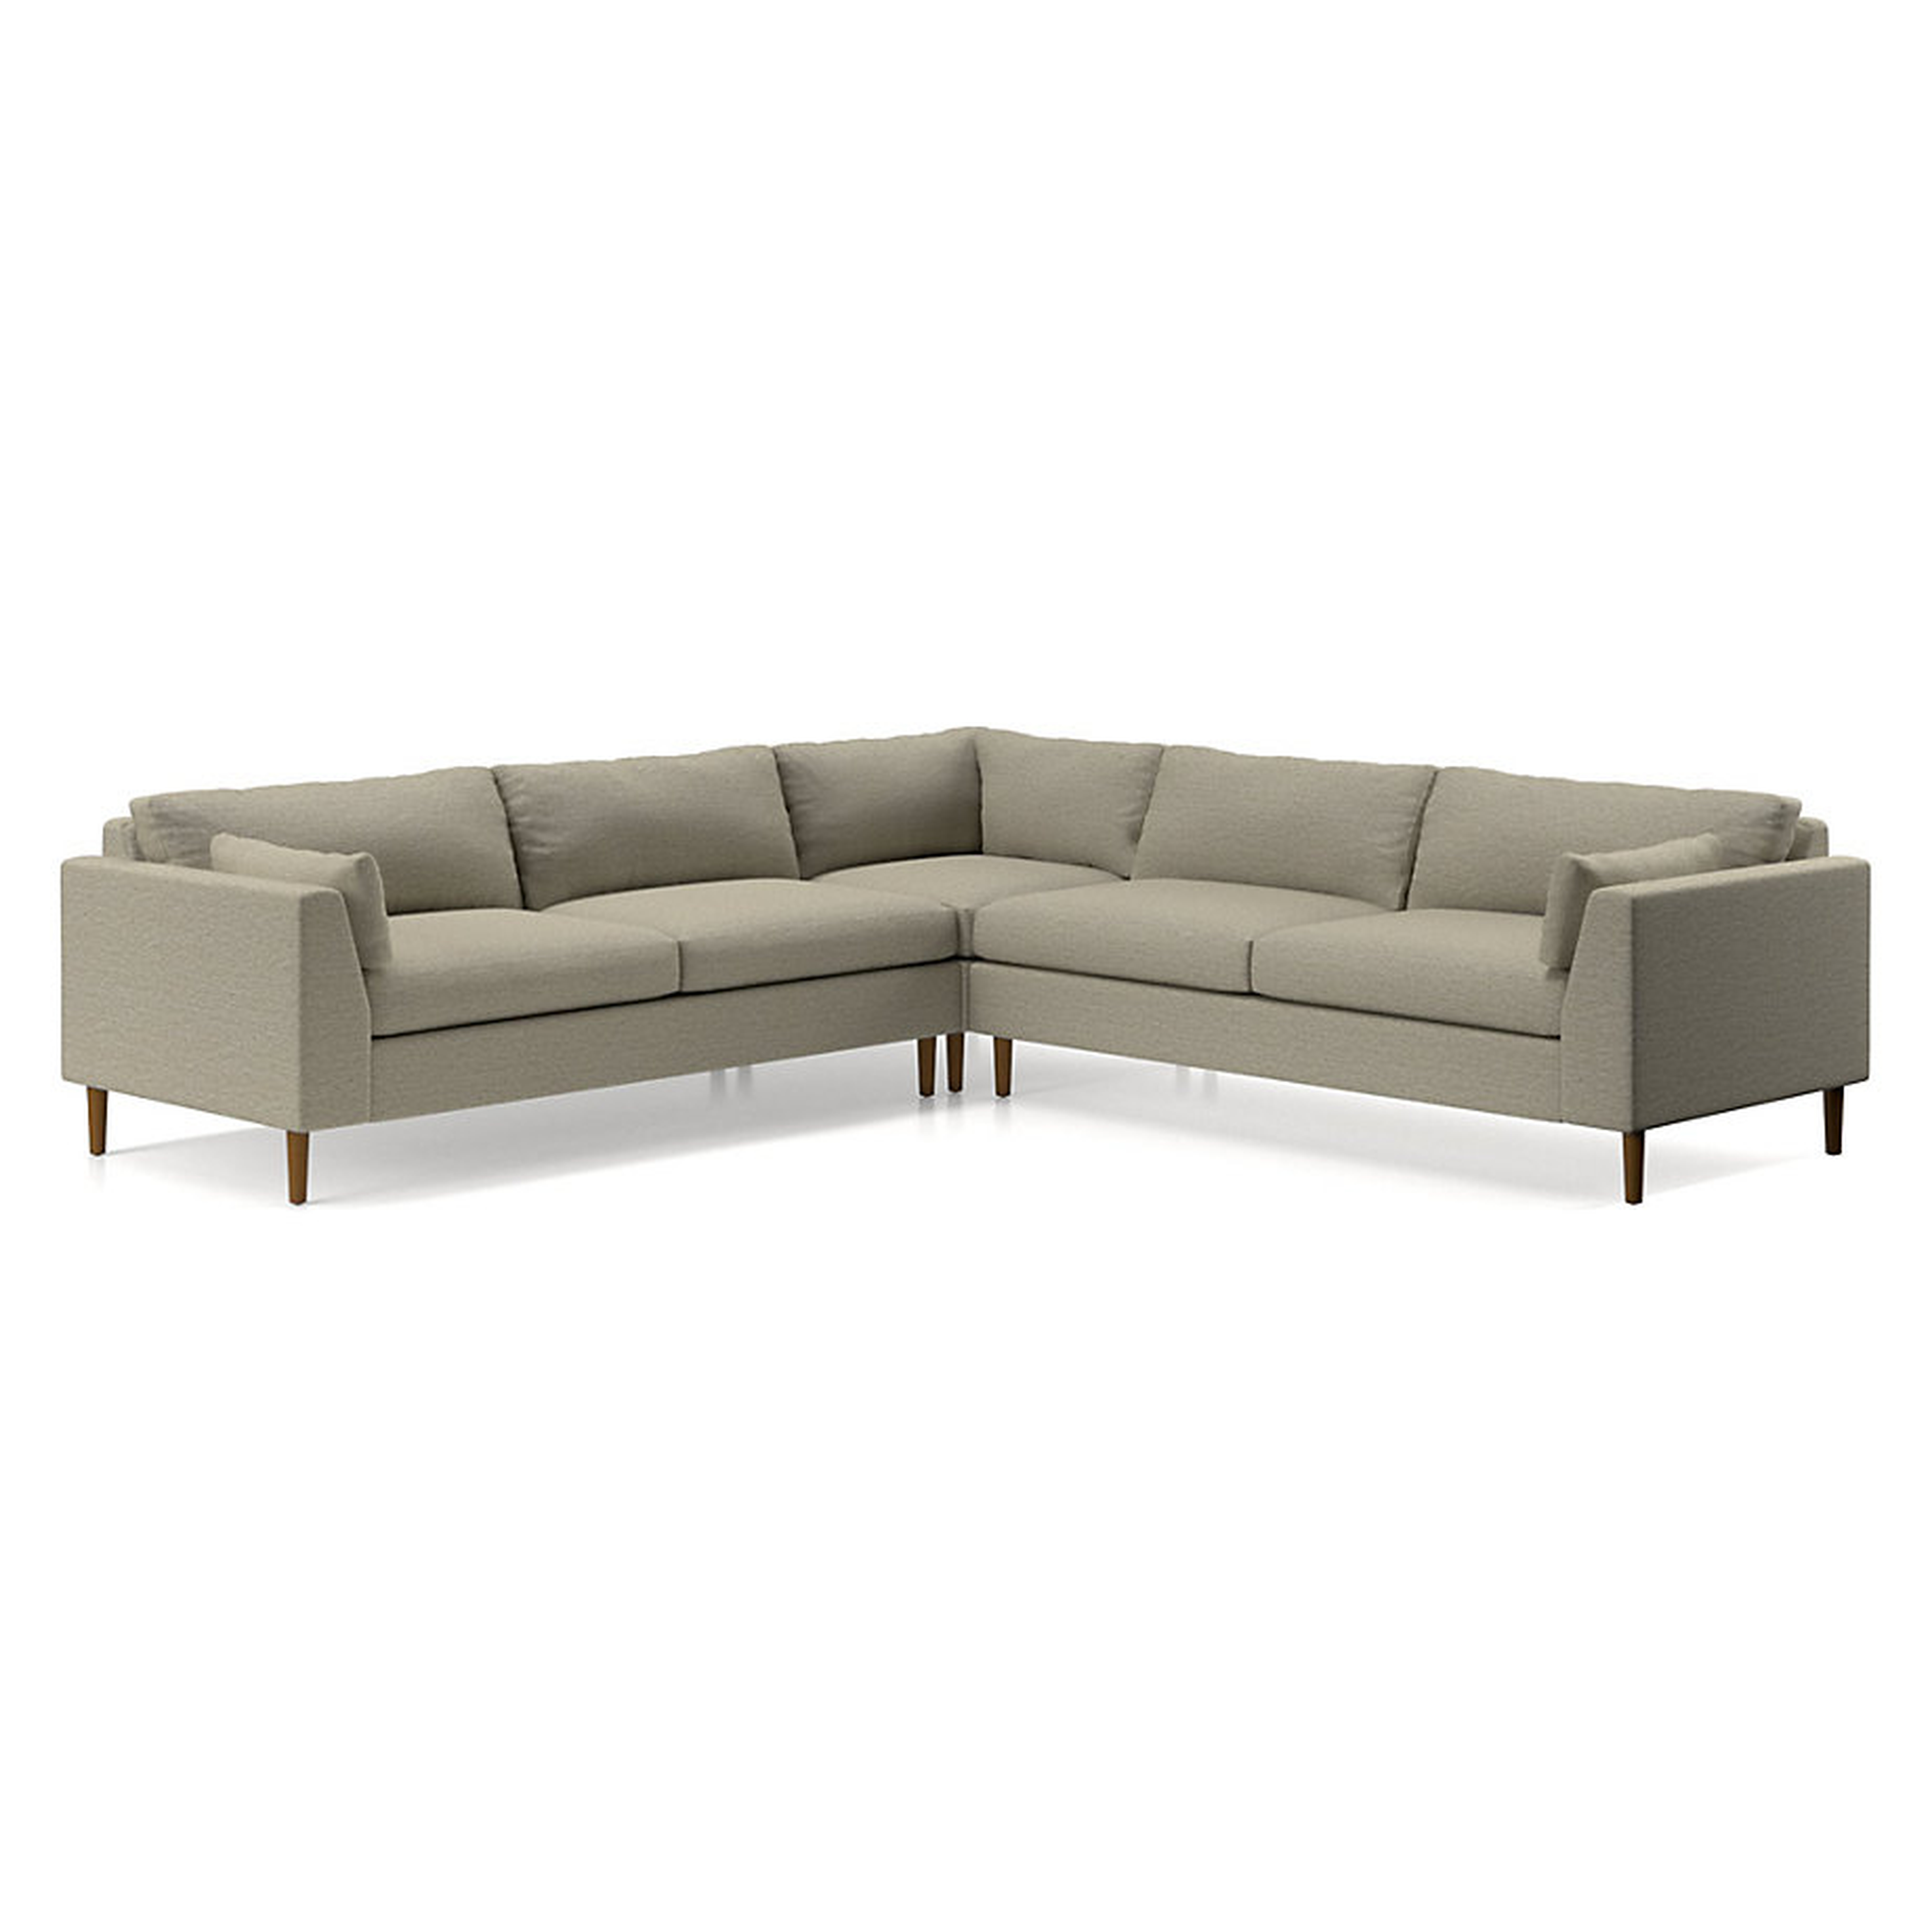 Avondale Wood Leg 3-Piece Sectional - Crate and Barrel